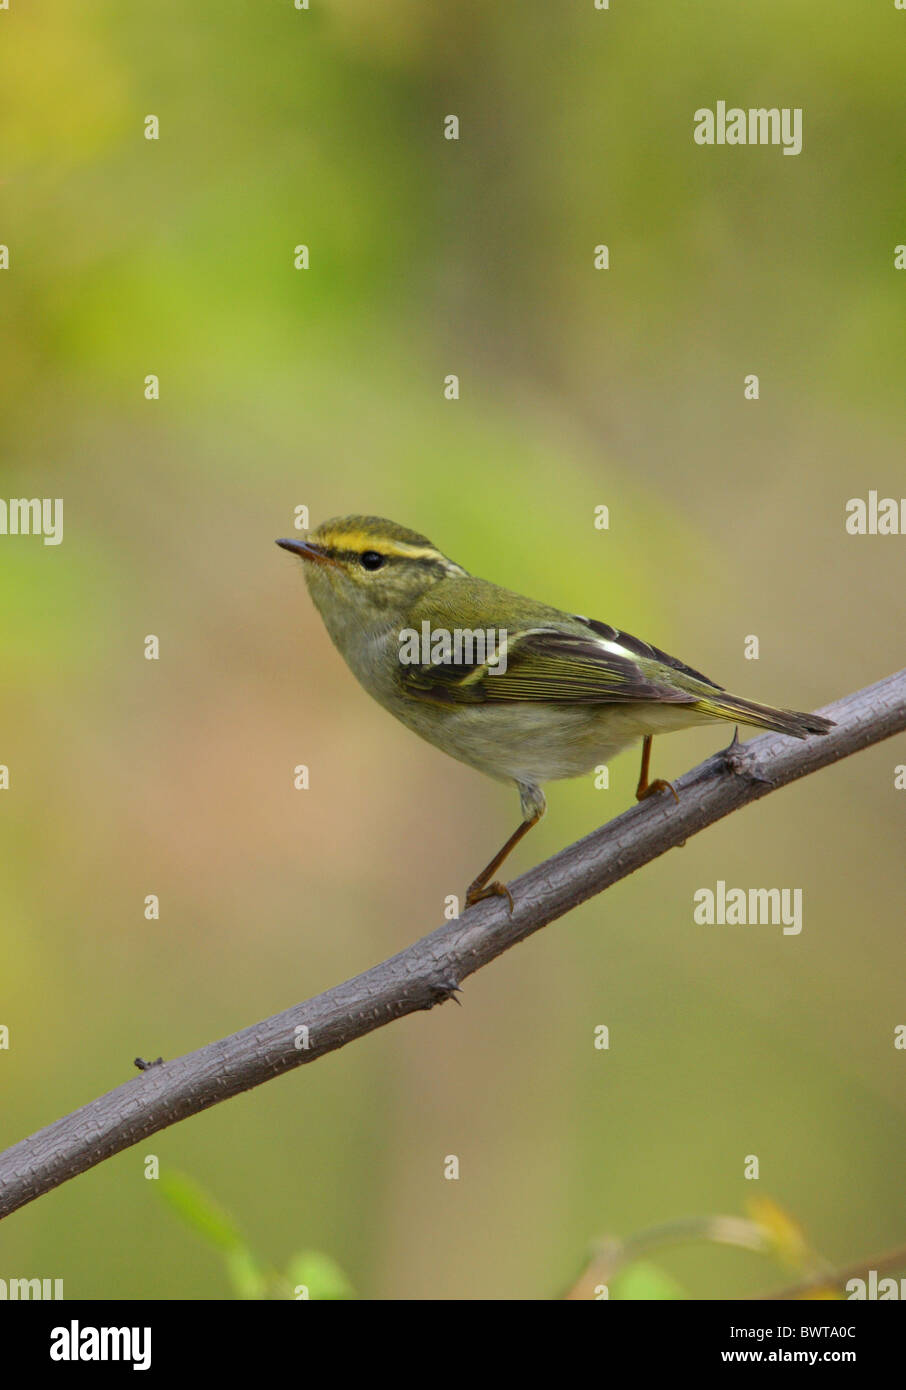 Pallas's Warbler (Phylloscopus proregulus) adult, perched on twig, Hebei, China, may Stock Photo